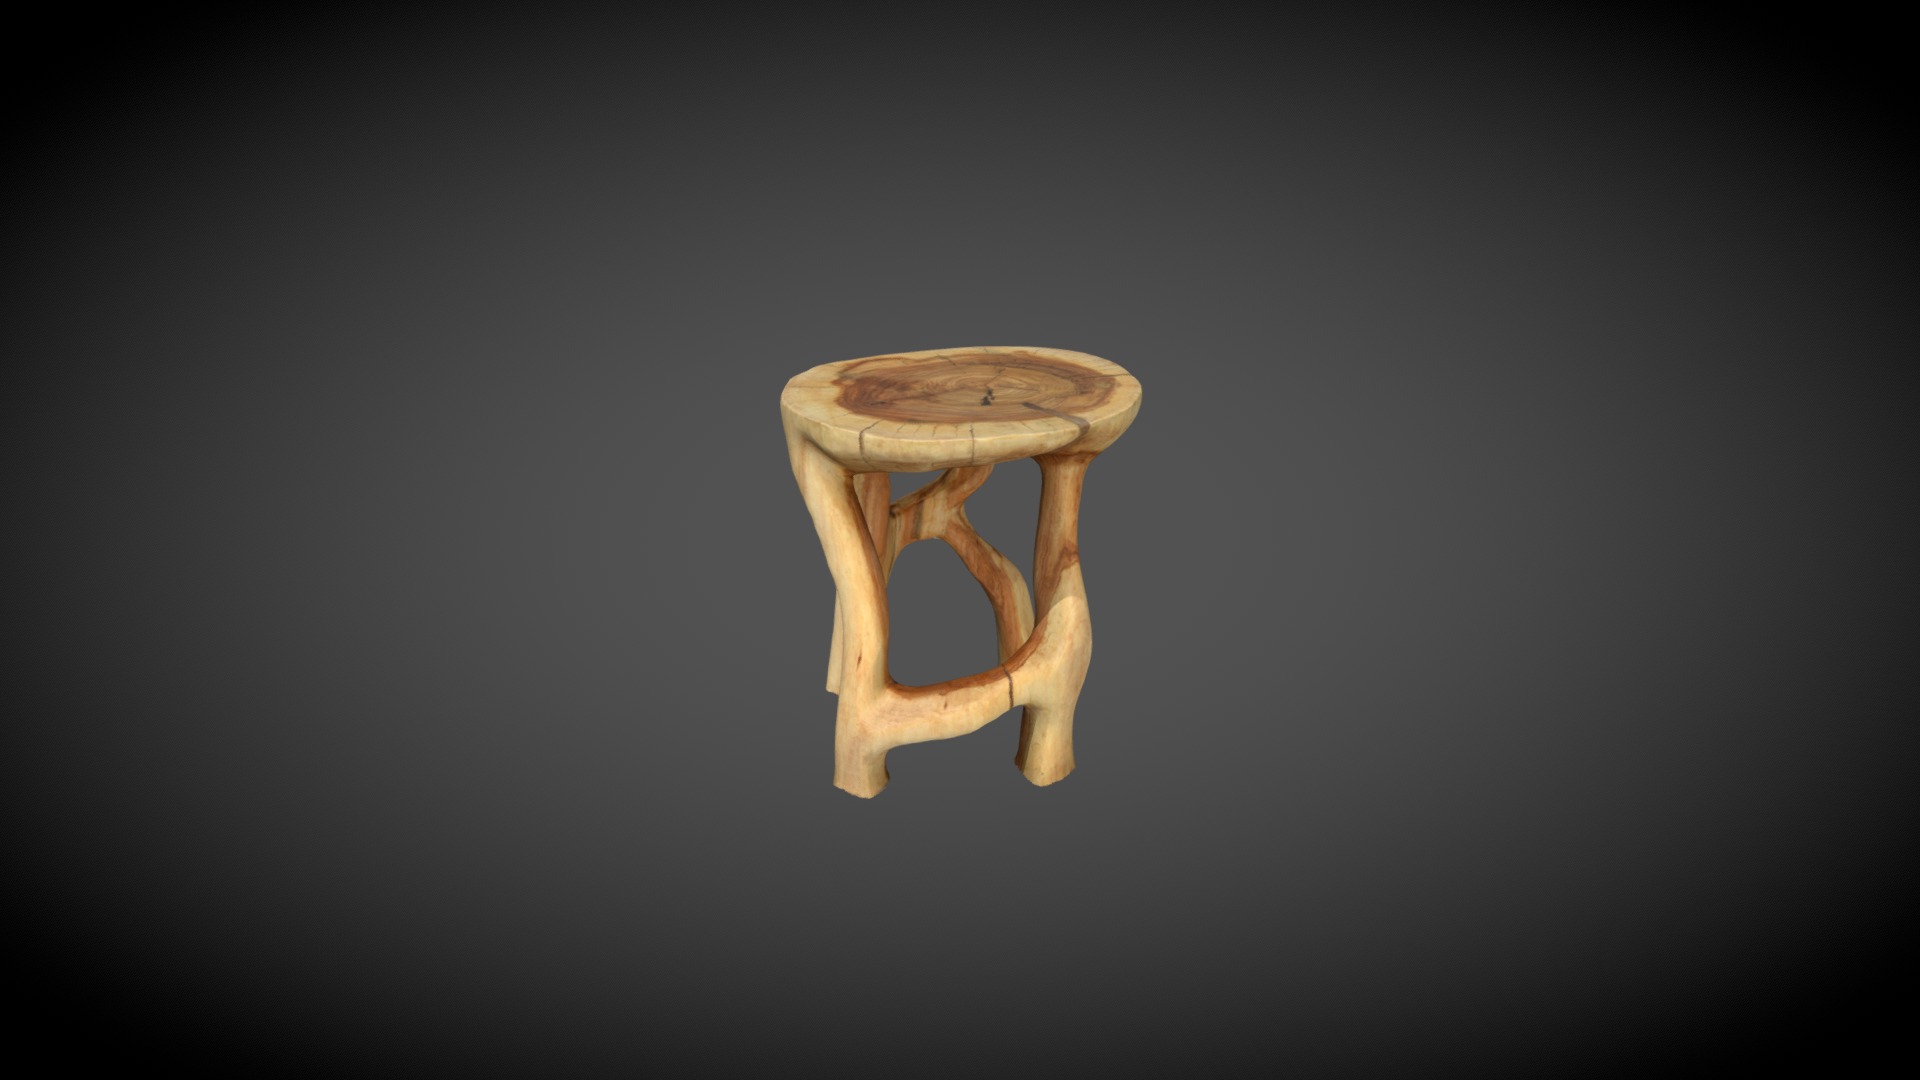 3D model Unique sculptural tabouret - This is a 3D model of the Unique sculptural tabouret. The 3D model is about a wooden chair on a black background.